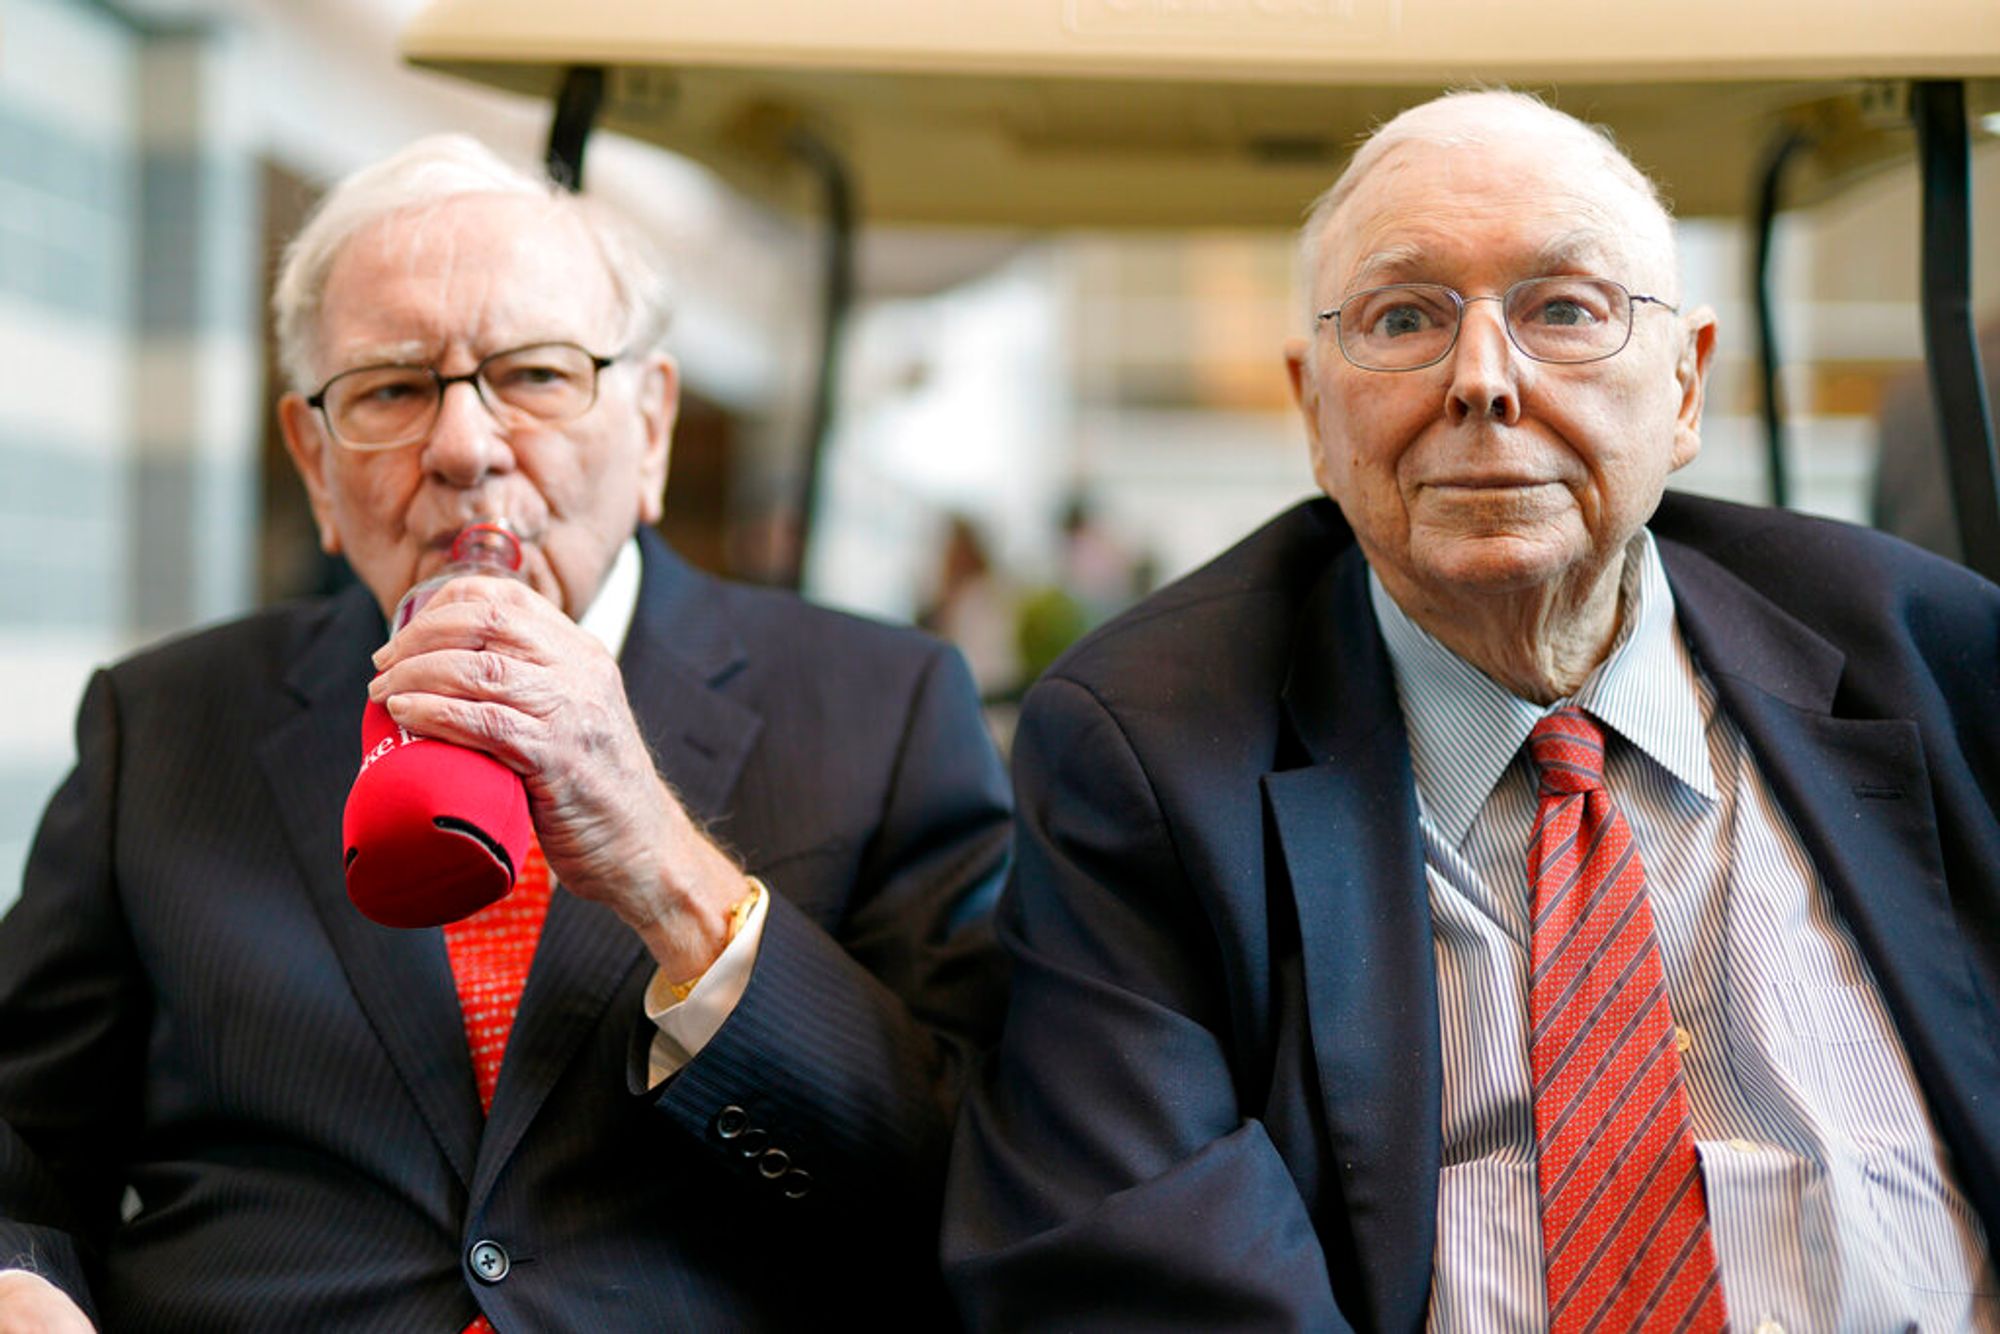 Final Thoughts From Charlie Munger on Warren Buffett, China, and the Big Costco Error